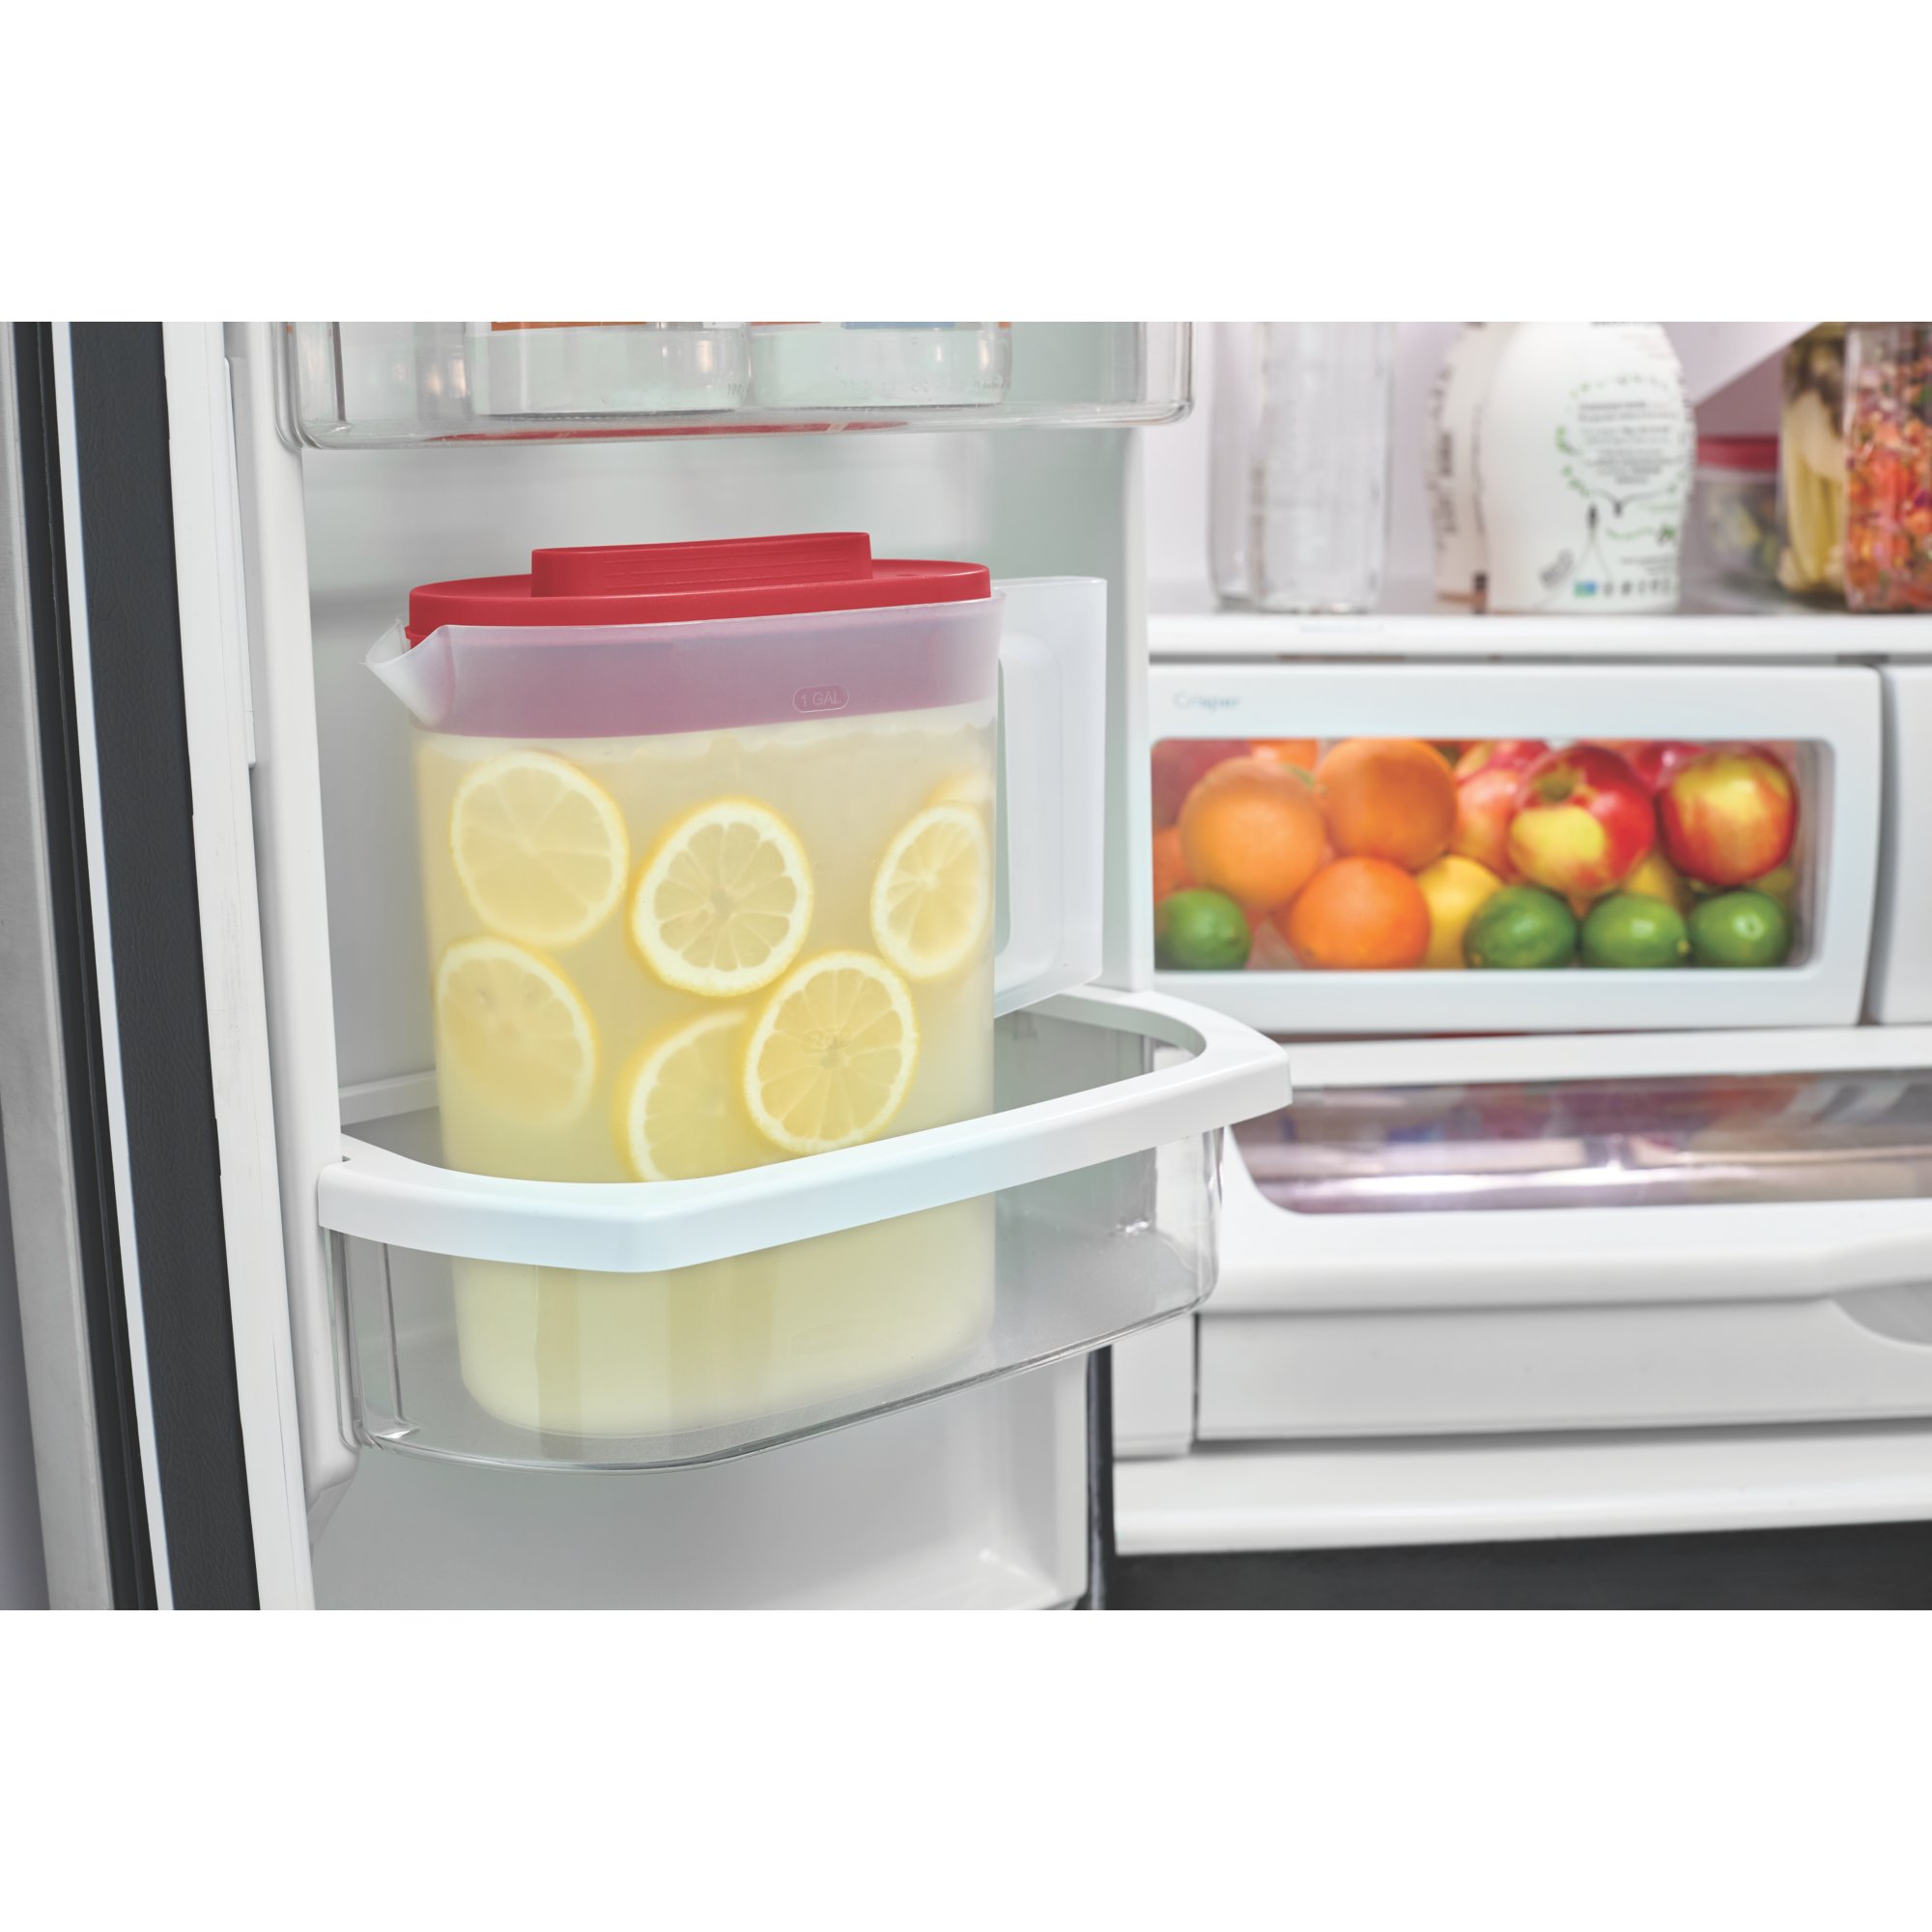 https://s7d9.scene7.com/is/image/NewellRubbermaid/2122602-rubbermaid-food-storage-compact-pitcher-1g-red-refrigerator-with-food-lifestyle?wid=2000&hei=2000